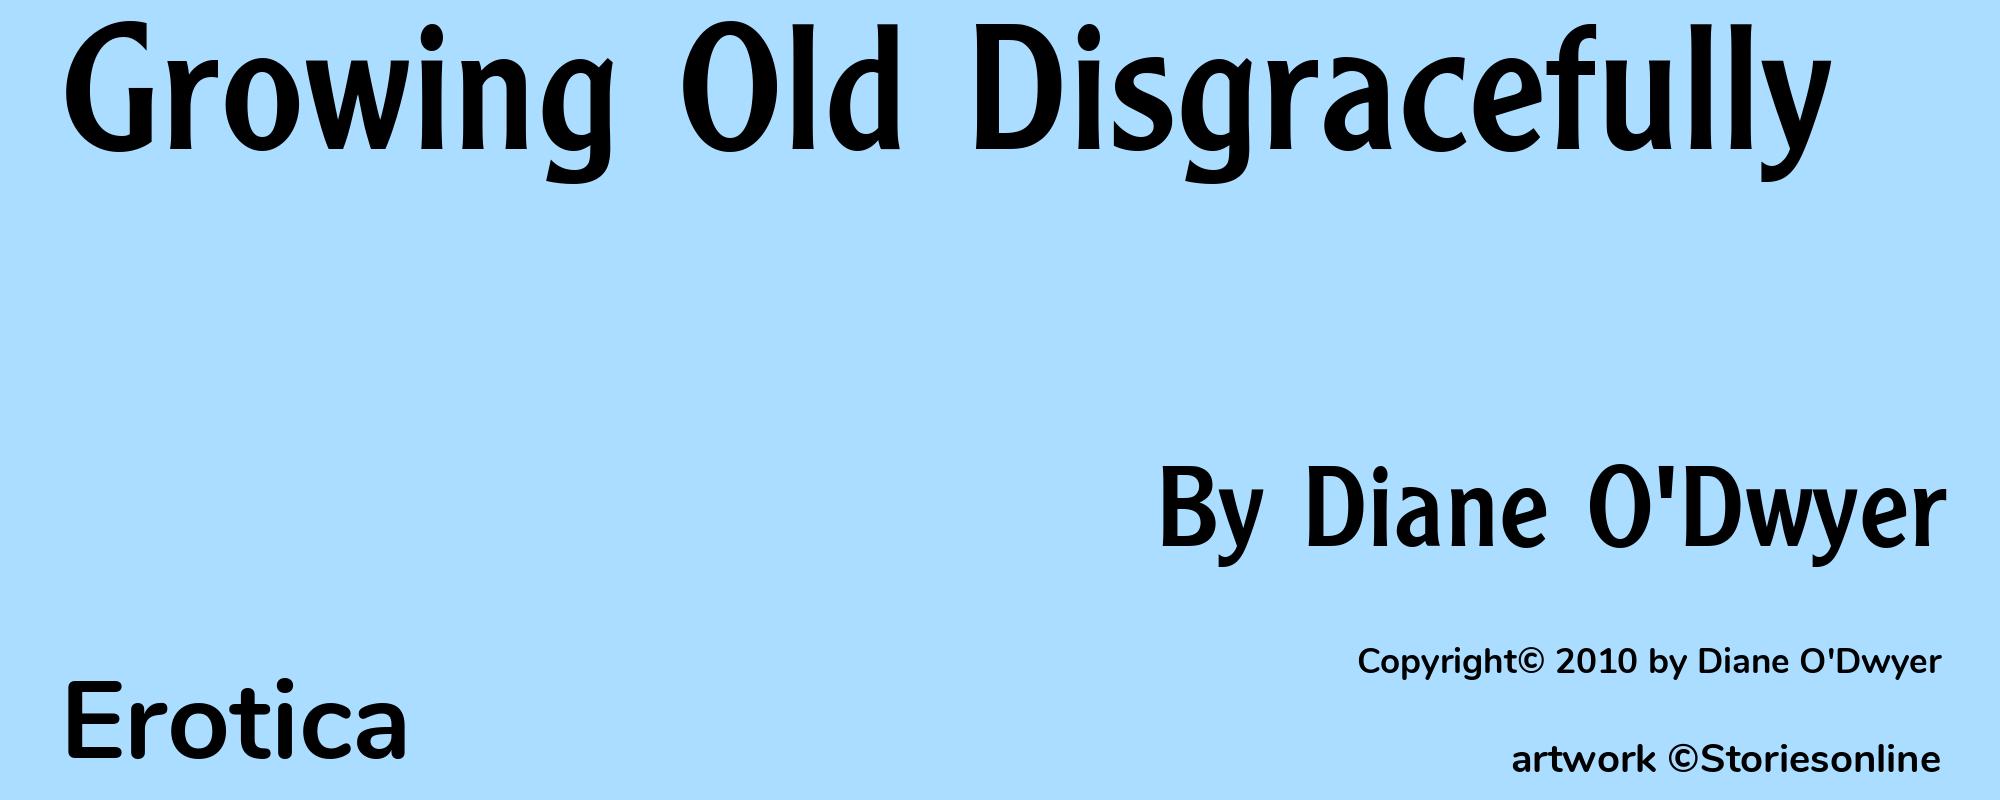 Growing Old Disgracefully - Cover